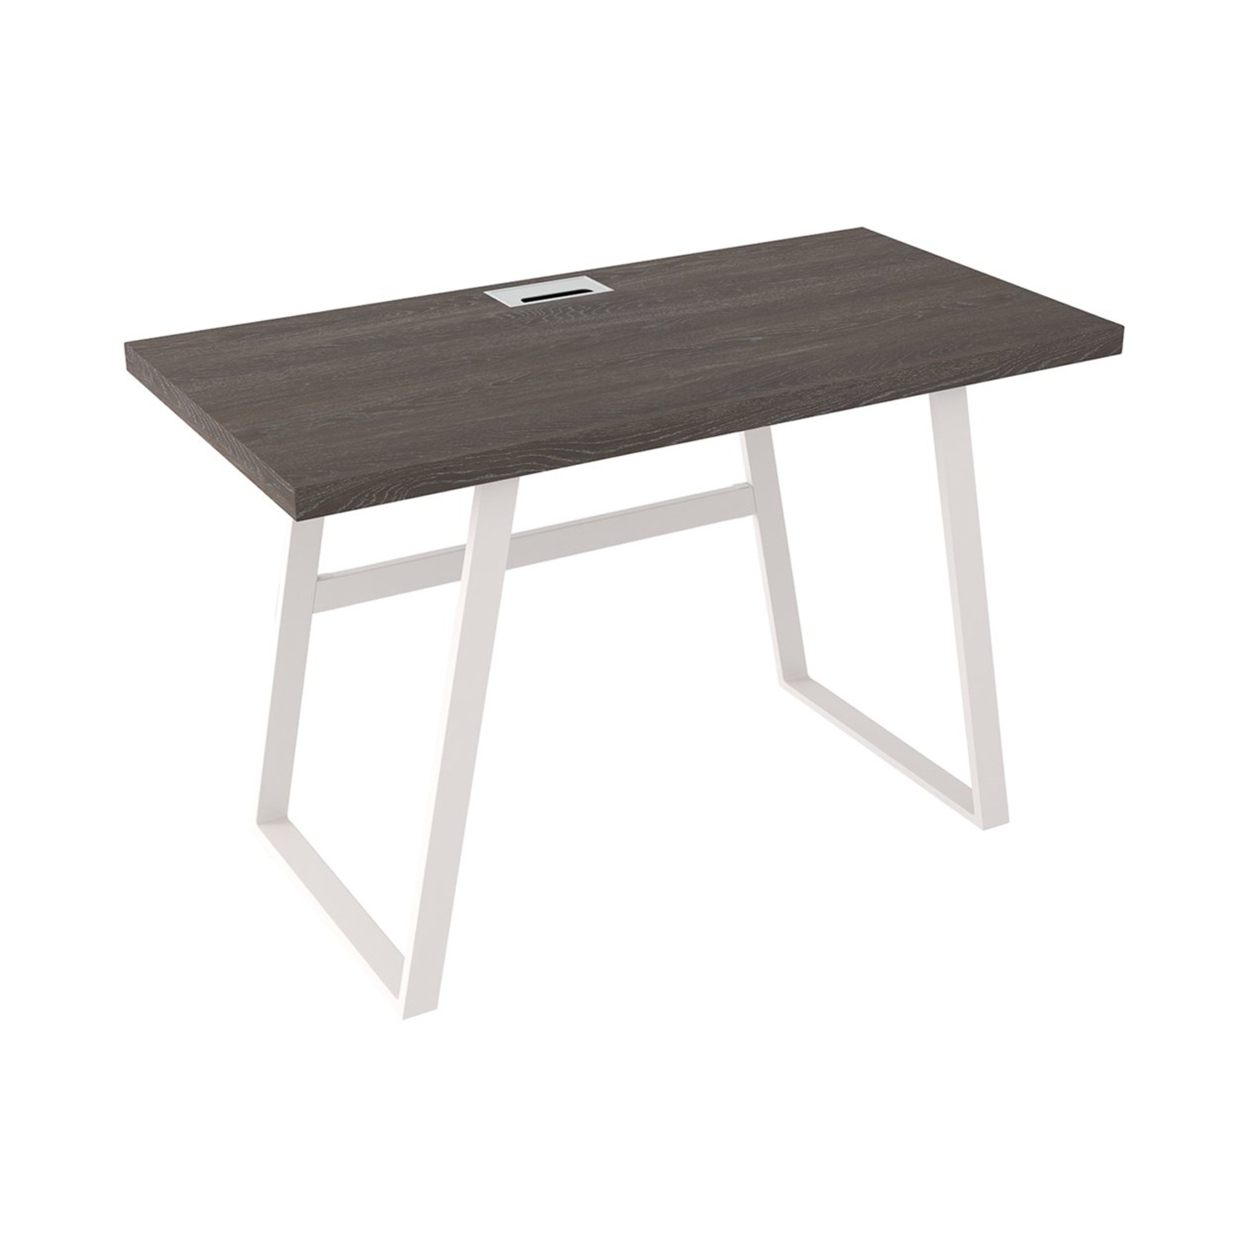 Wooden Writing Desk With Metal Base And Rectangular Top, Gray And White- Saltoro Sherpi